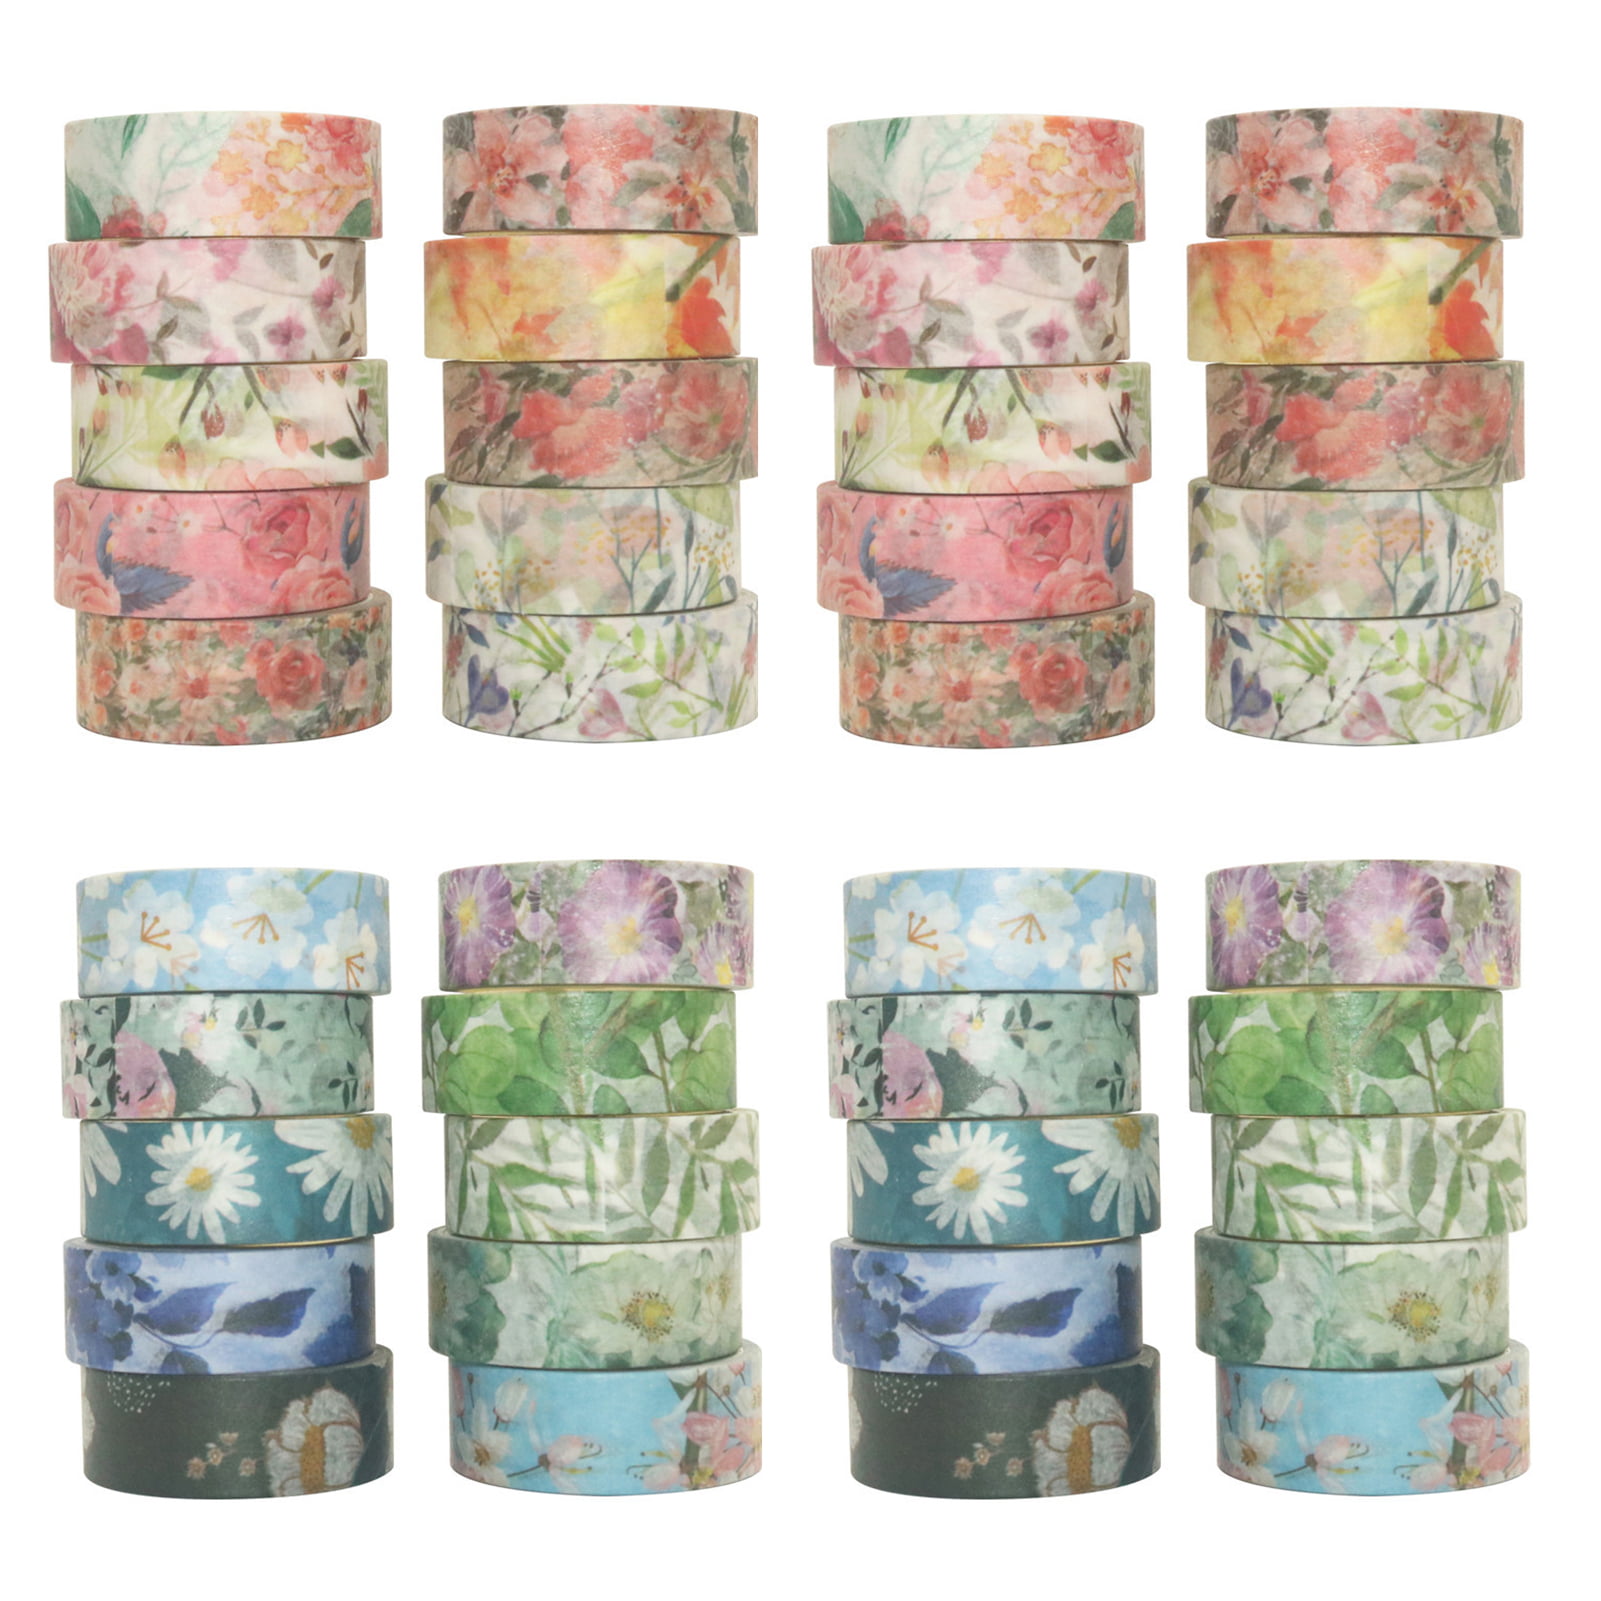 VIVIQUEN 20 Rolls Flower Washi Tape Set, 15mm Floral Washi Tape for Bullet  Journal, Masking Decorative Tapes for Arts and DIY Crafts, Gift Wrapping